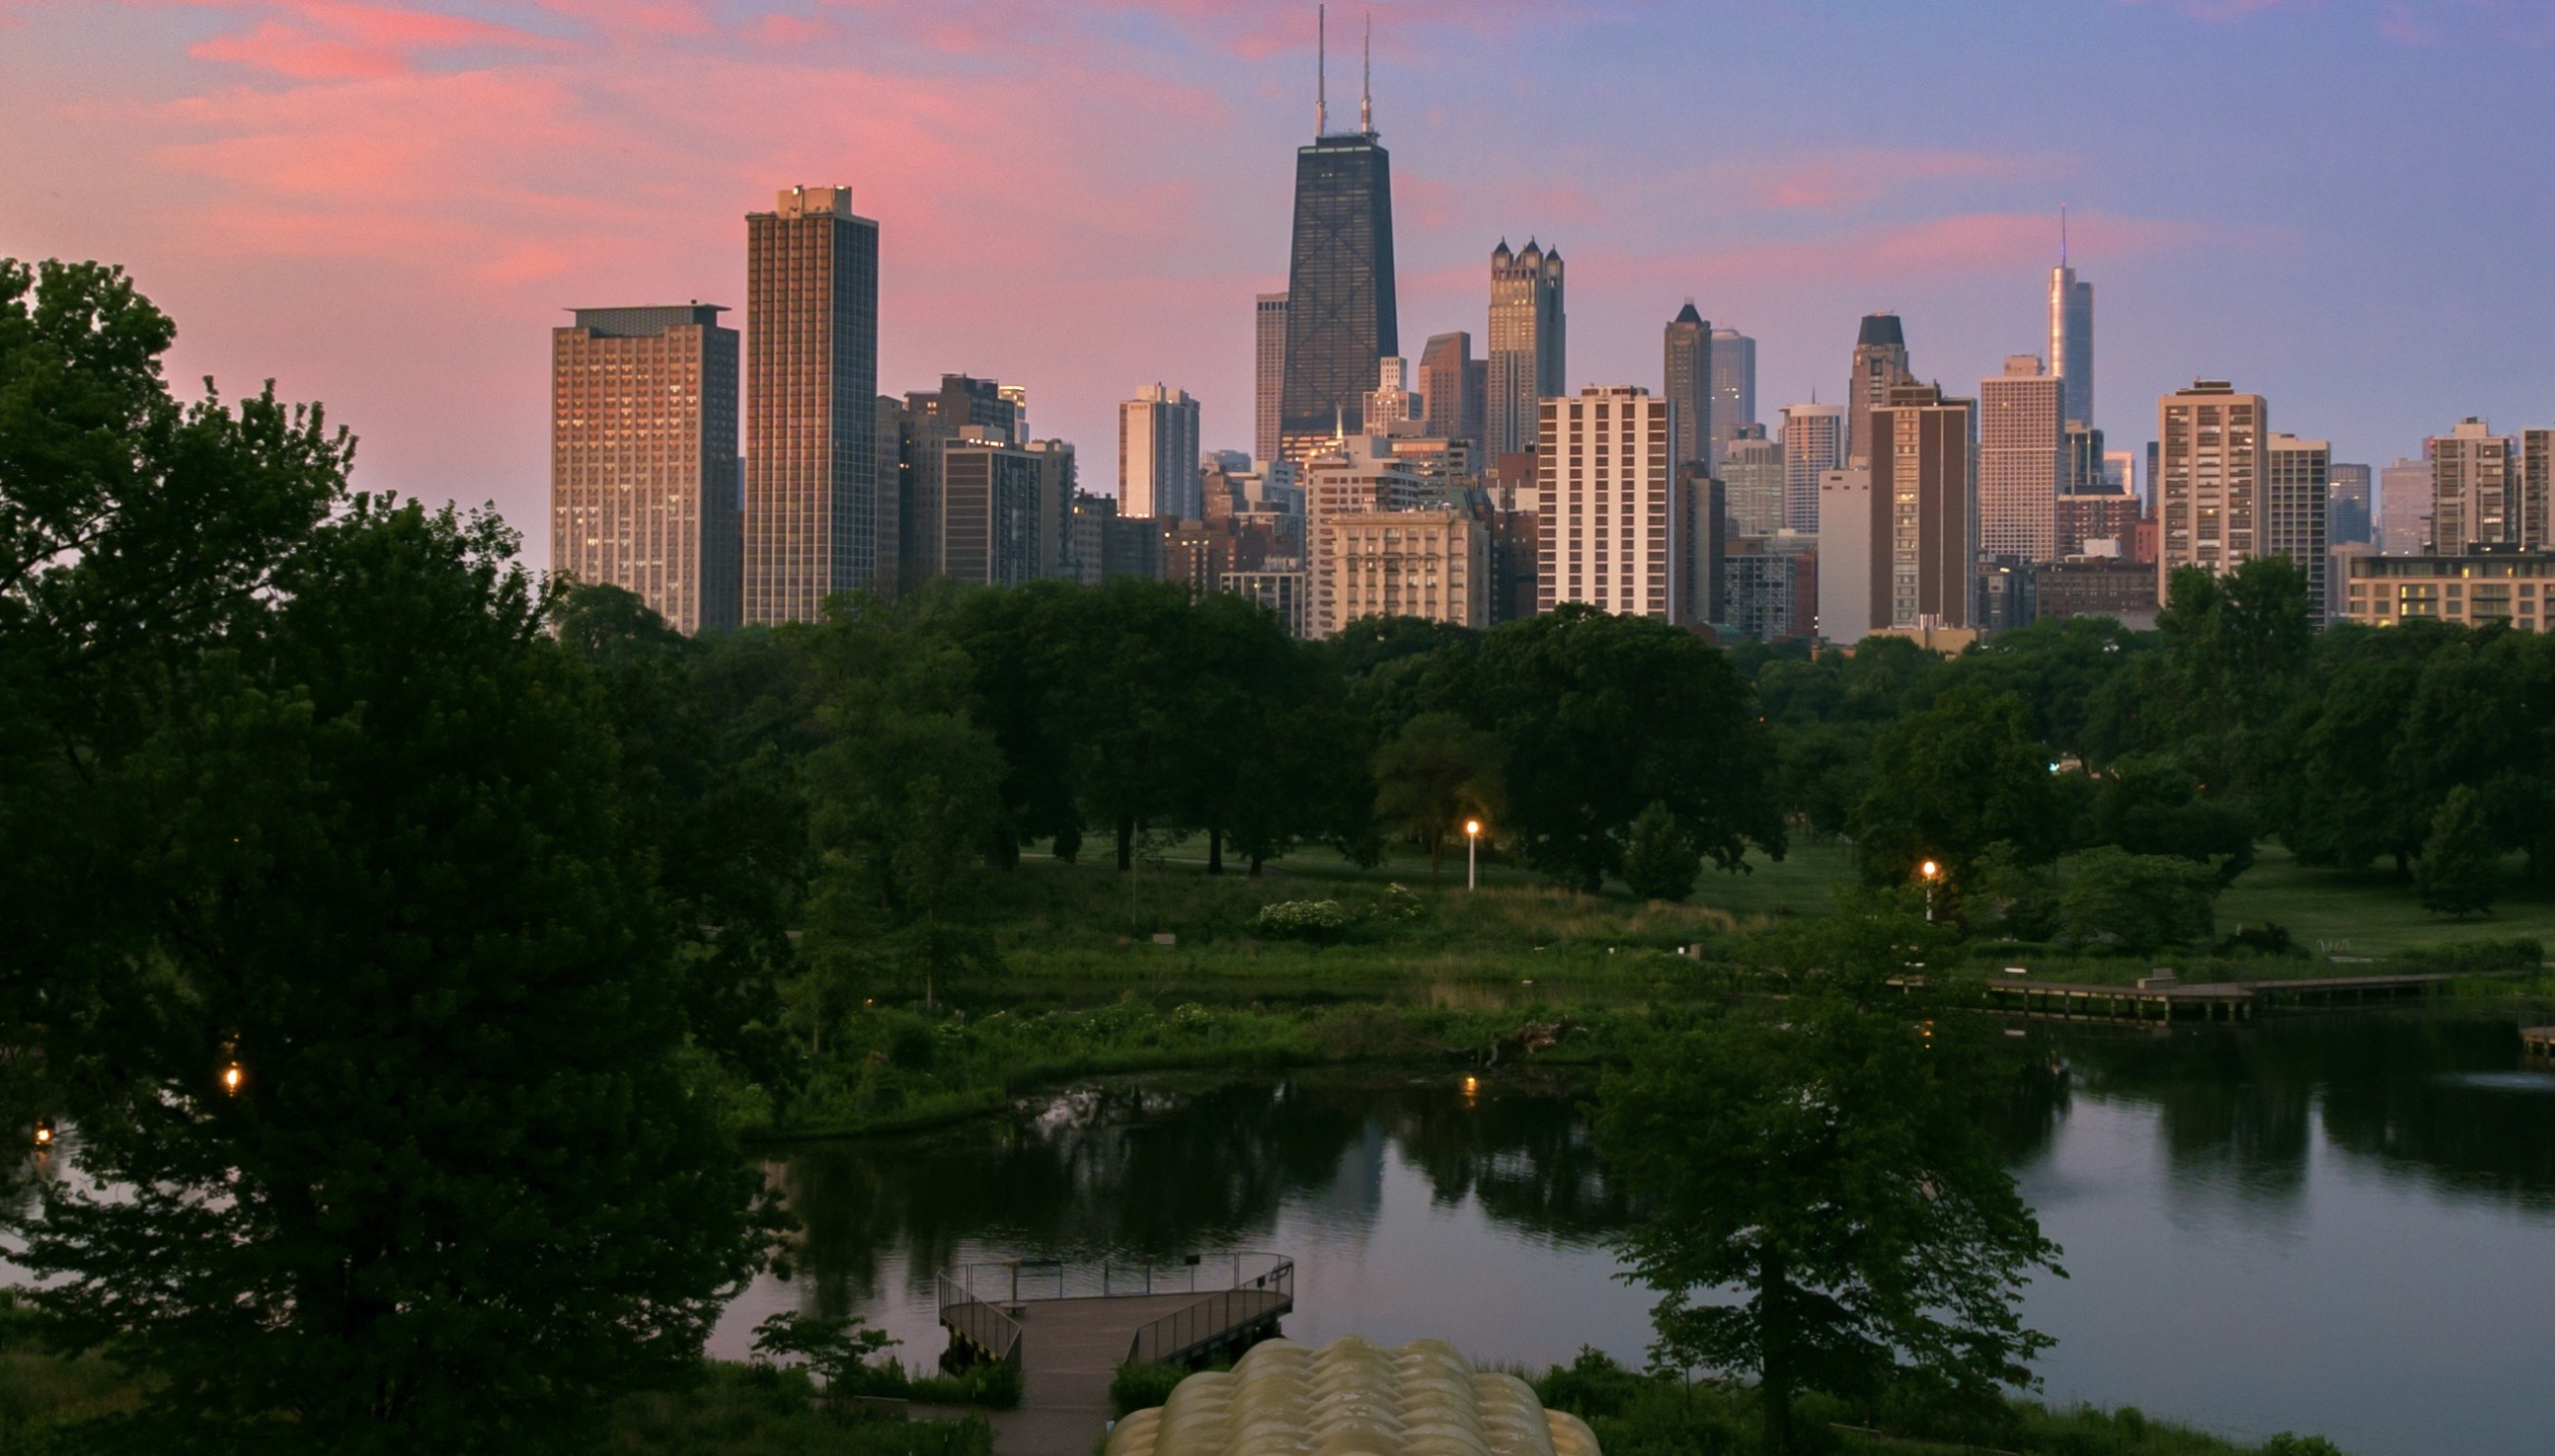 Chicago is officially one of the most expensive cities in the world